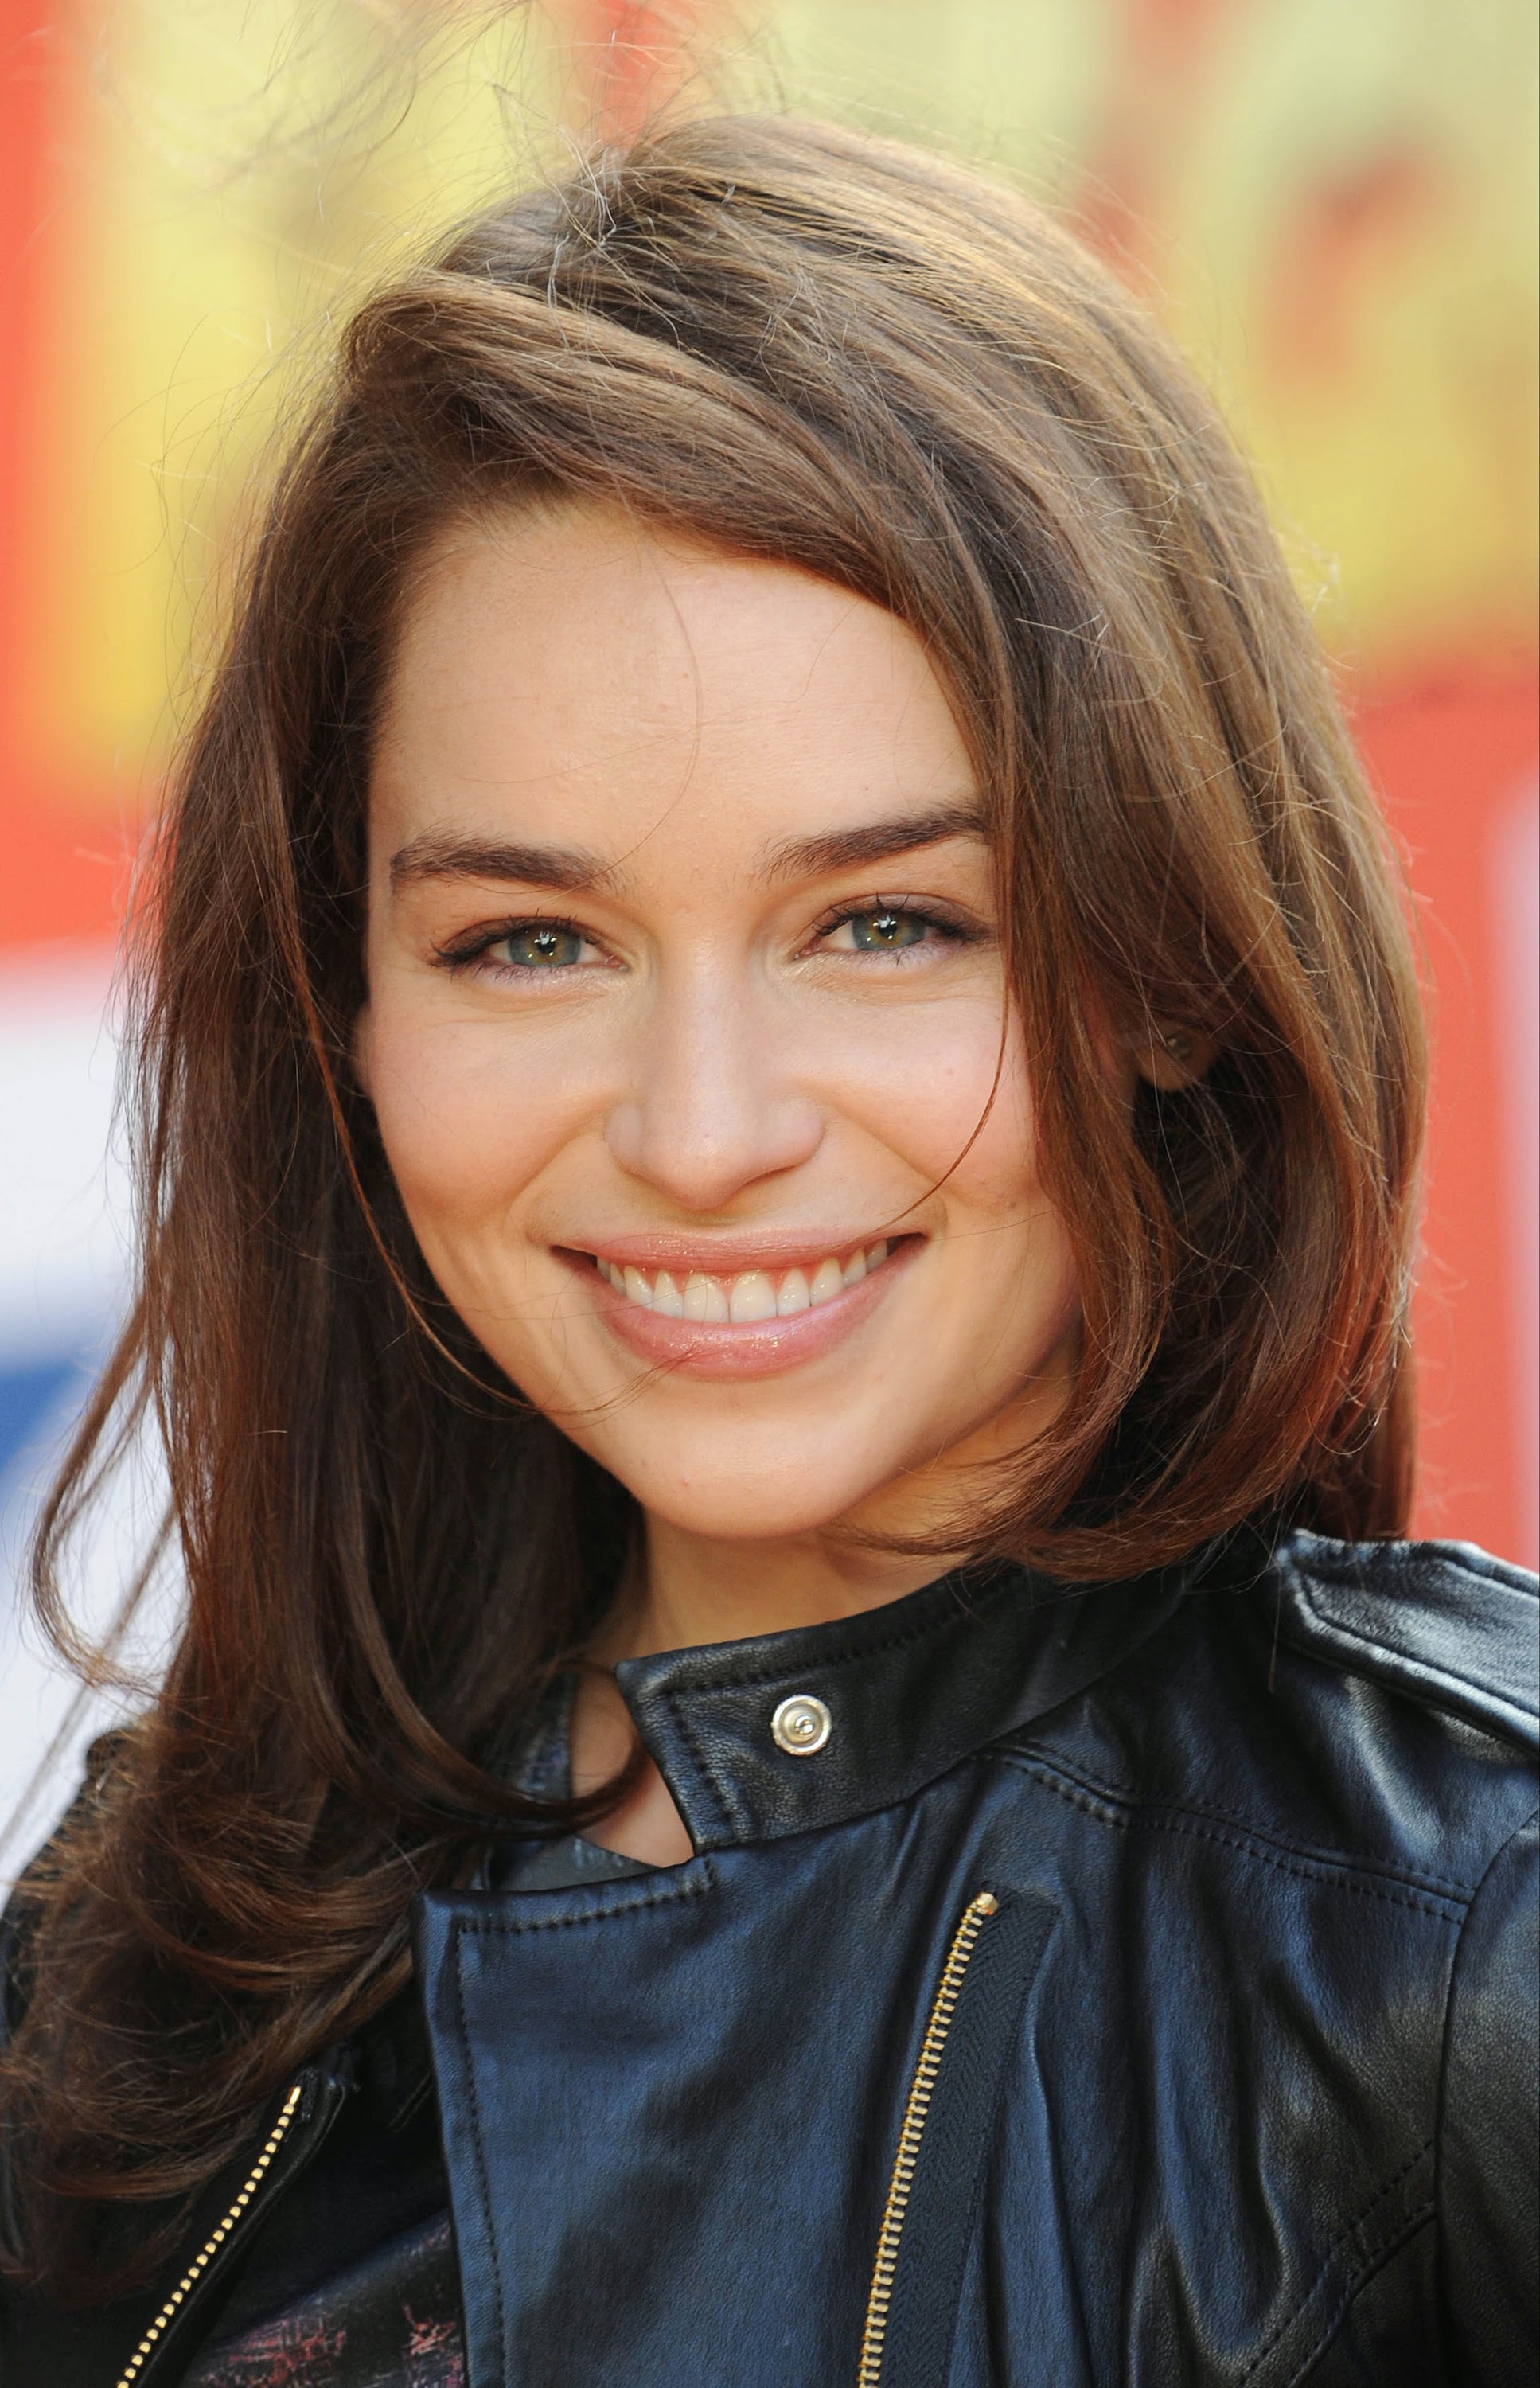 20 Pictures That Prove Emilia Clarke Deserves The Title Of 